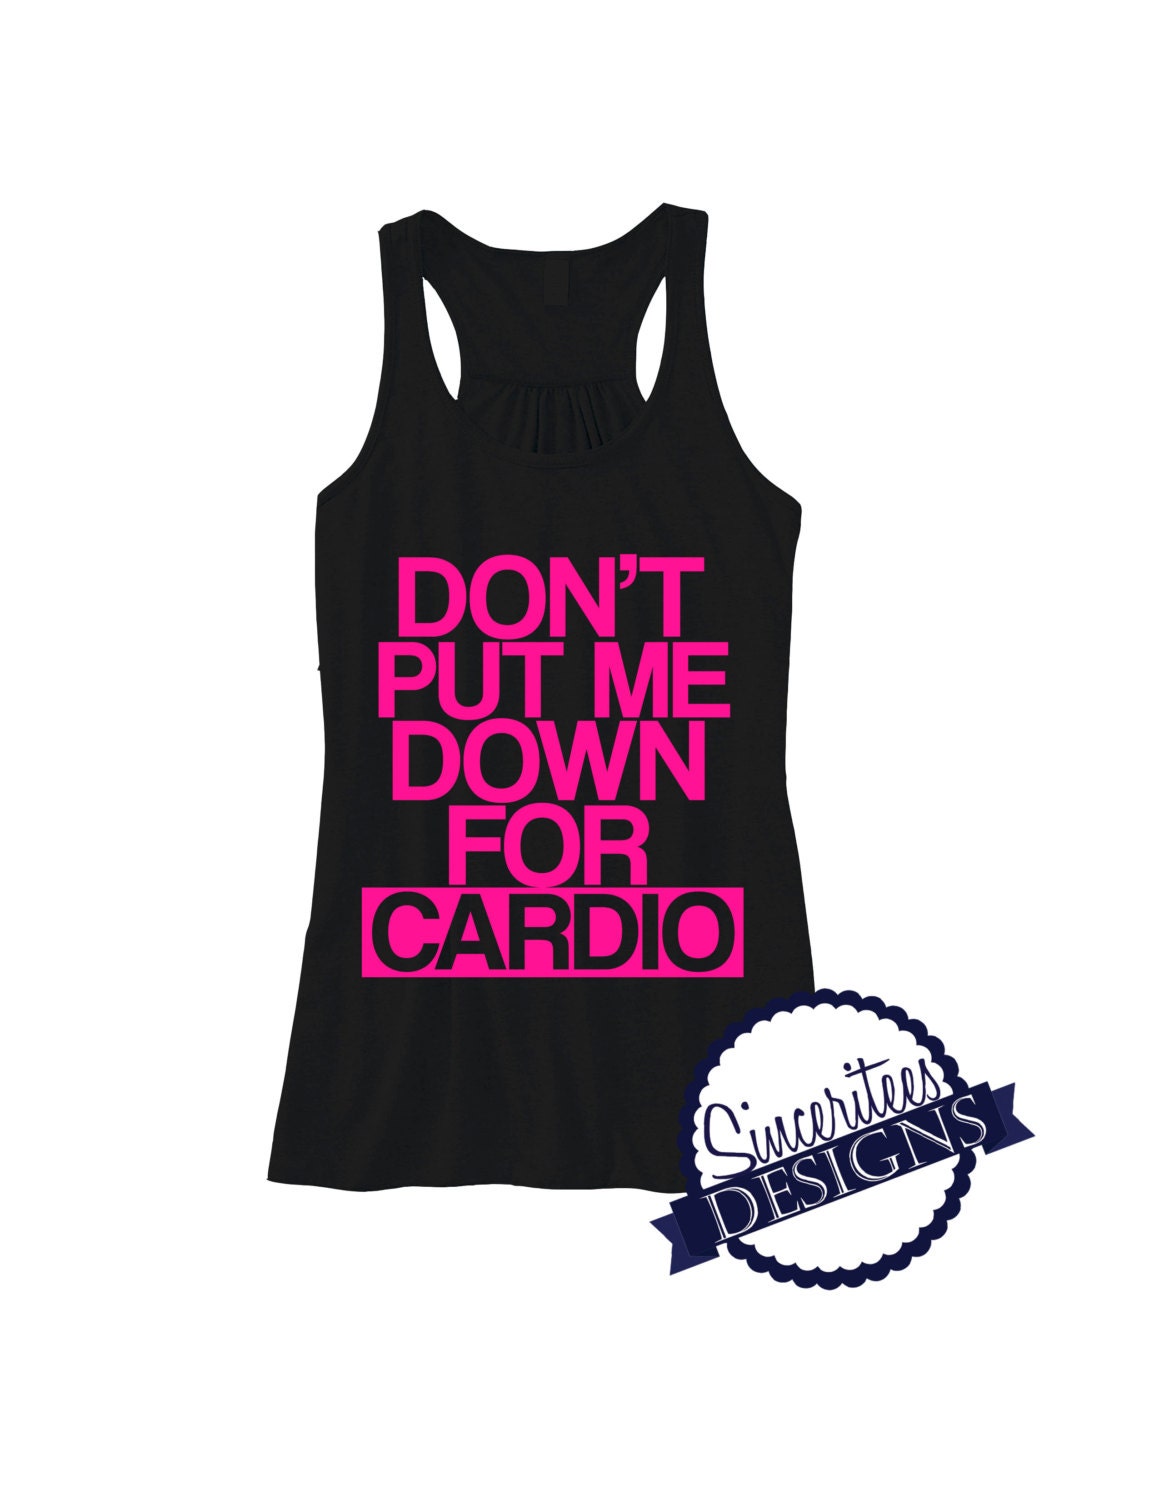 Workout Tank-Don't put me down for cardio by SinceriteesDesigns